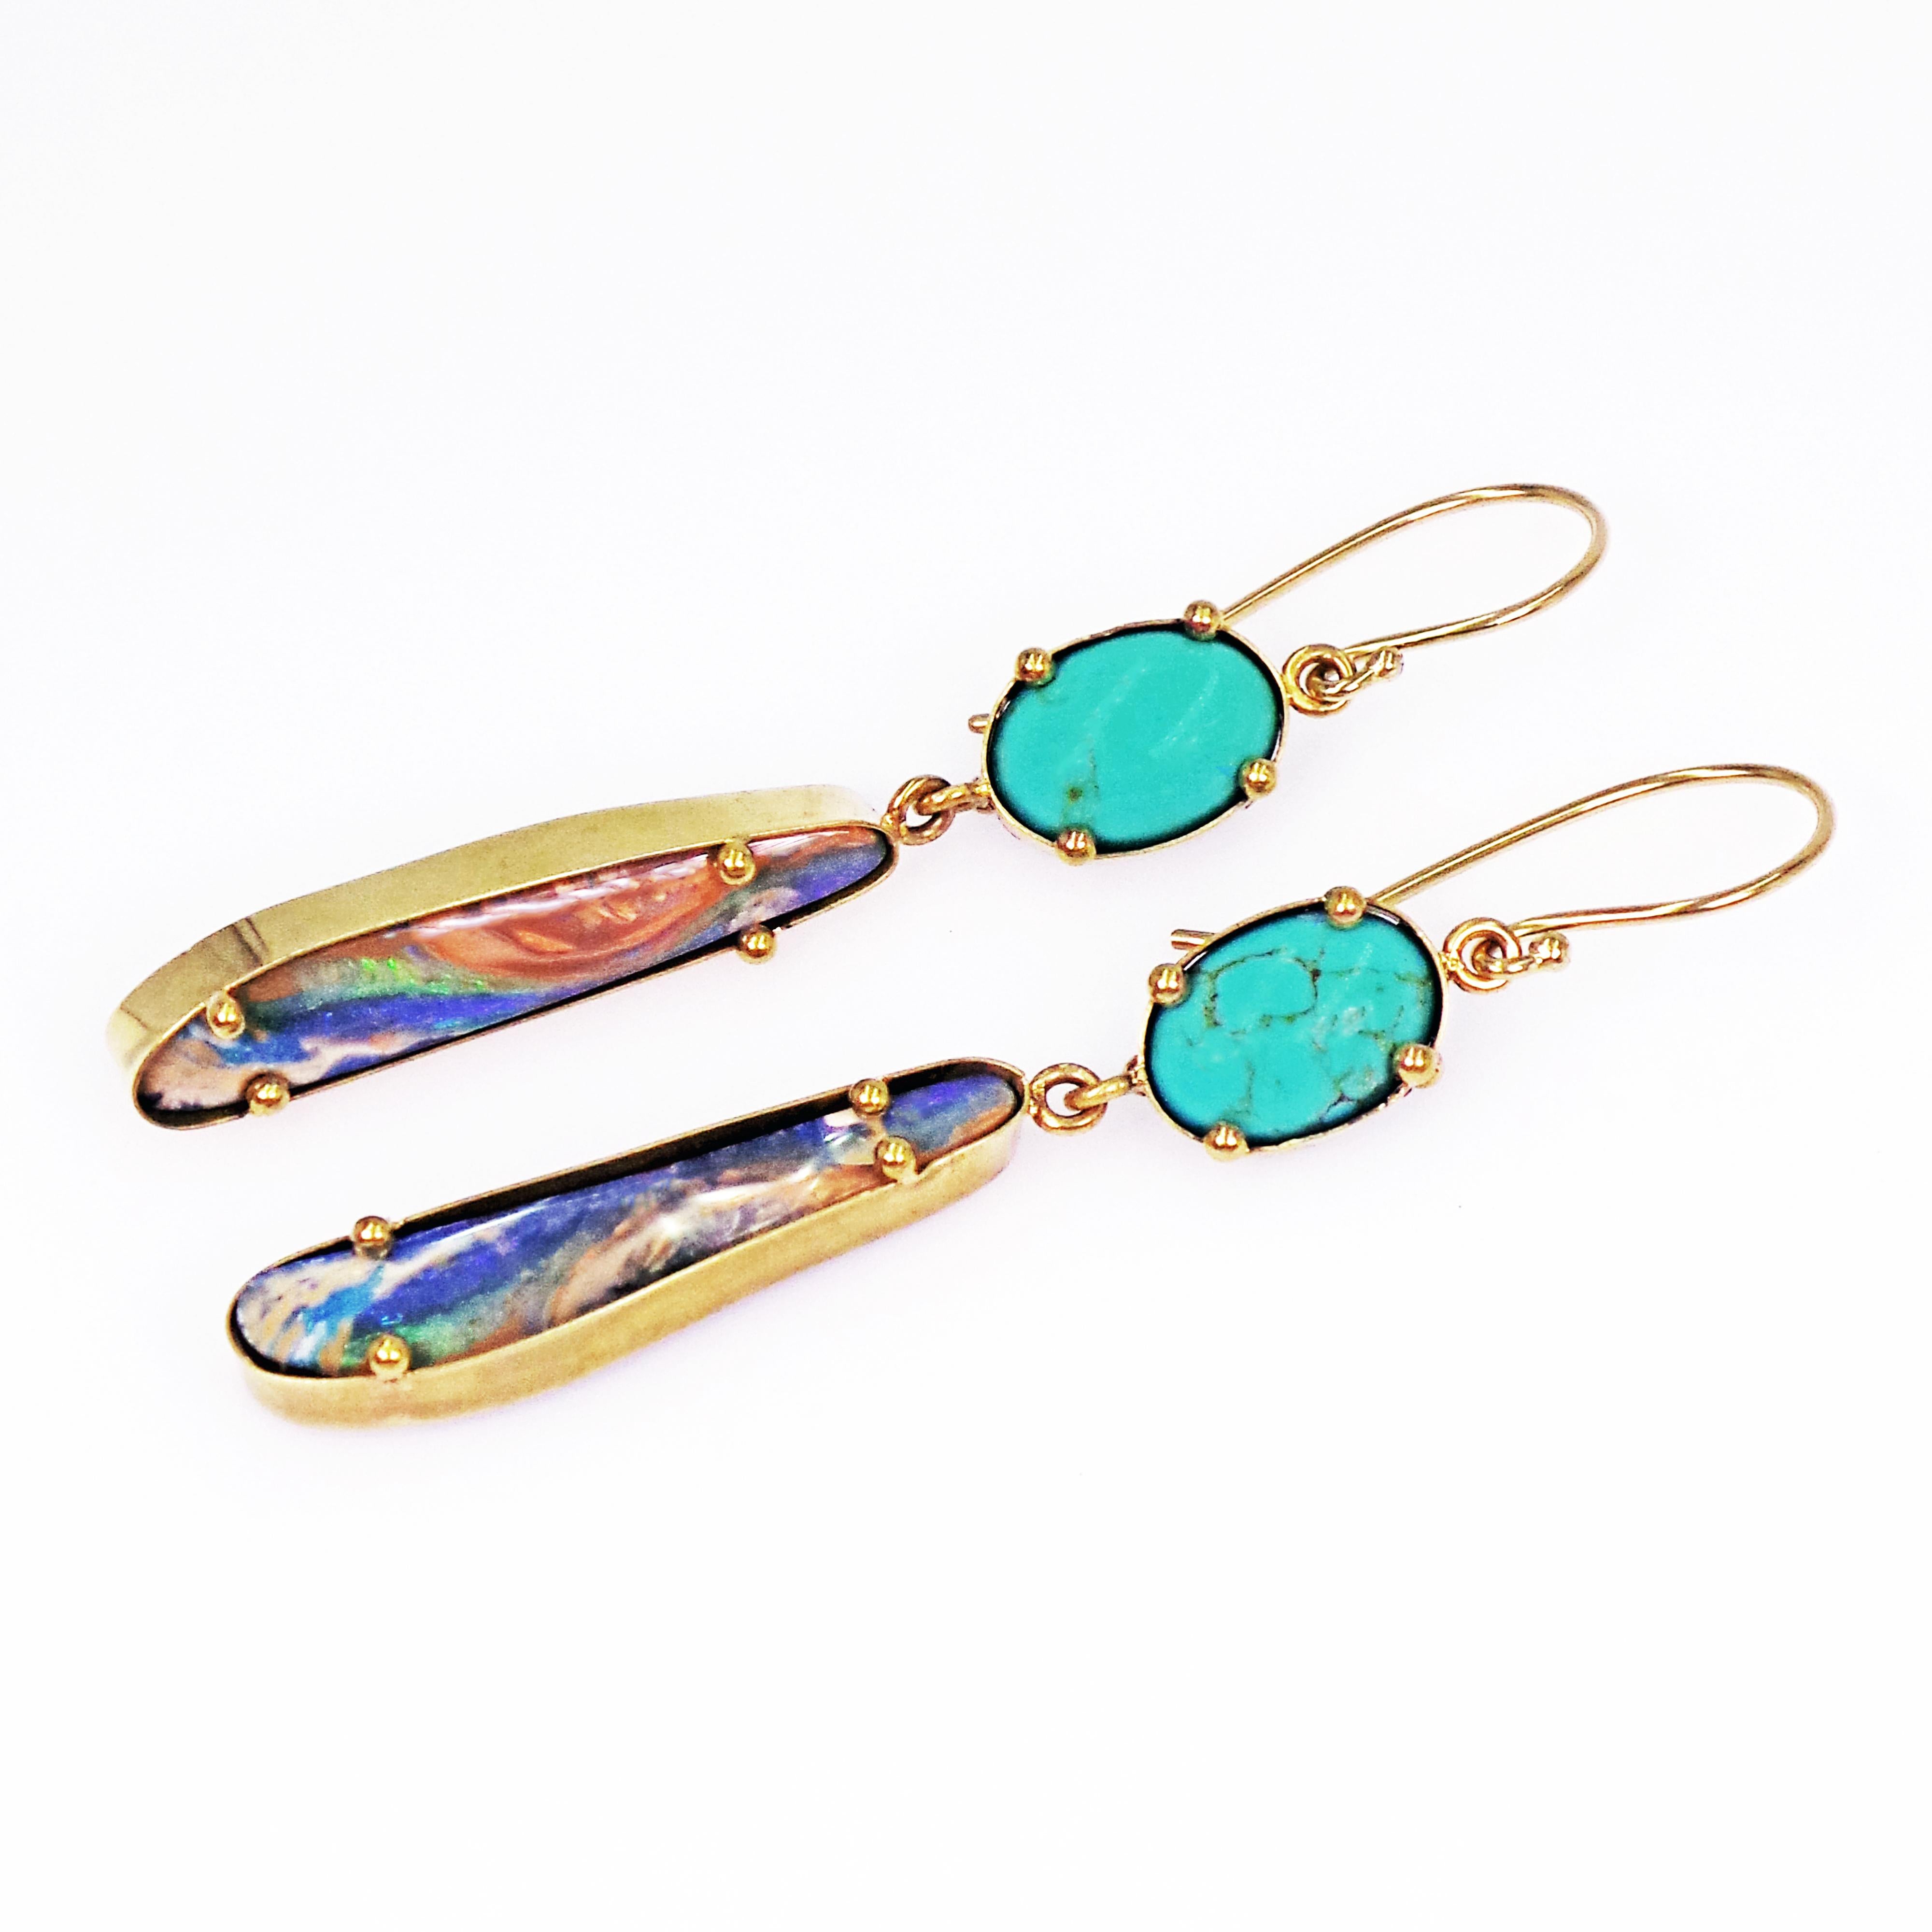 Amazing and unique Australian Boulder Opals and Carico Lake Turquoise (Nevada, USA) set in hand-forged 22k yellow gold dangle earrings with French wires. Truly spectacular colors and patterns in these natural gemstones. Simple, contemporary gold